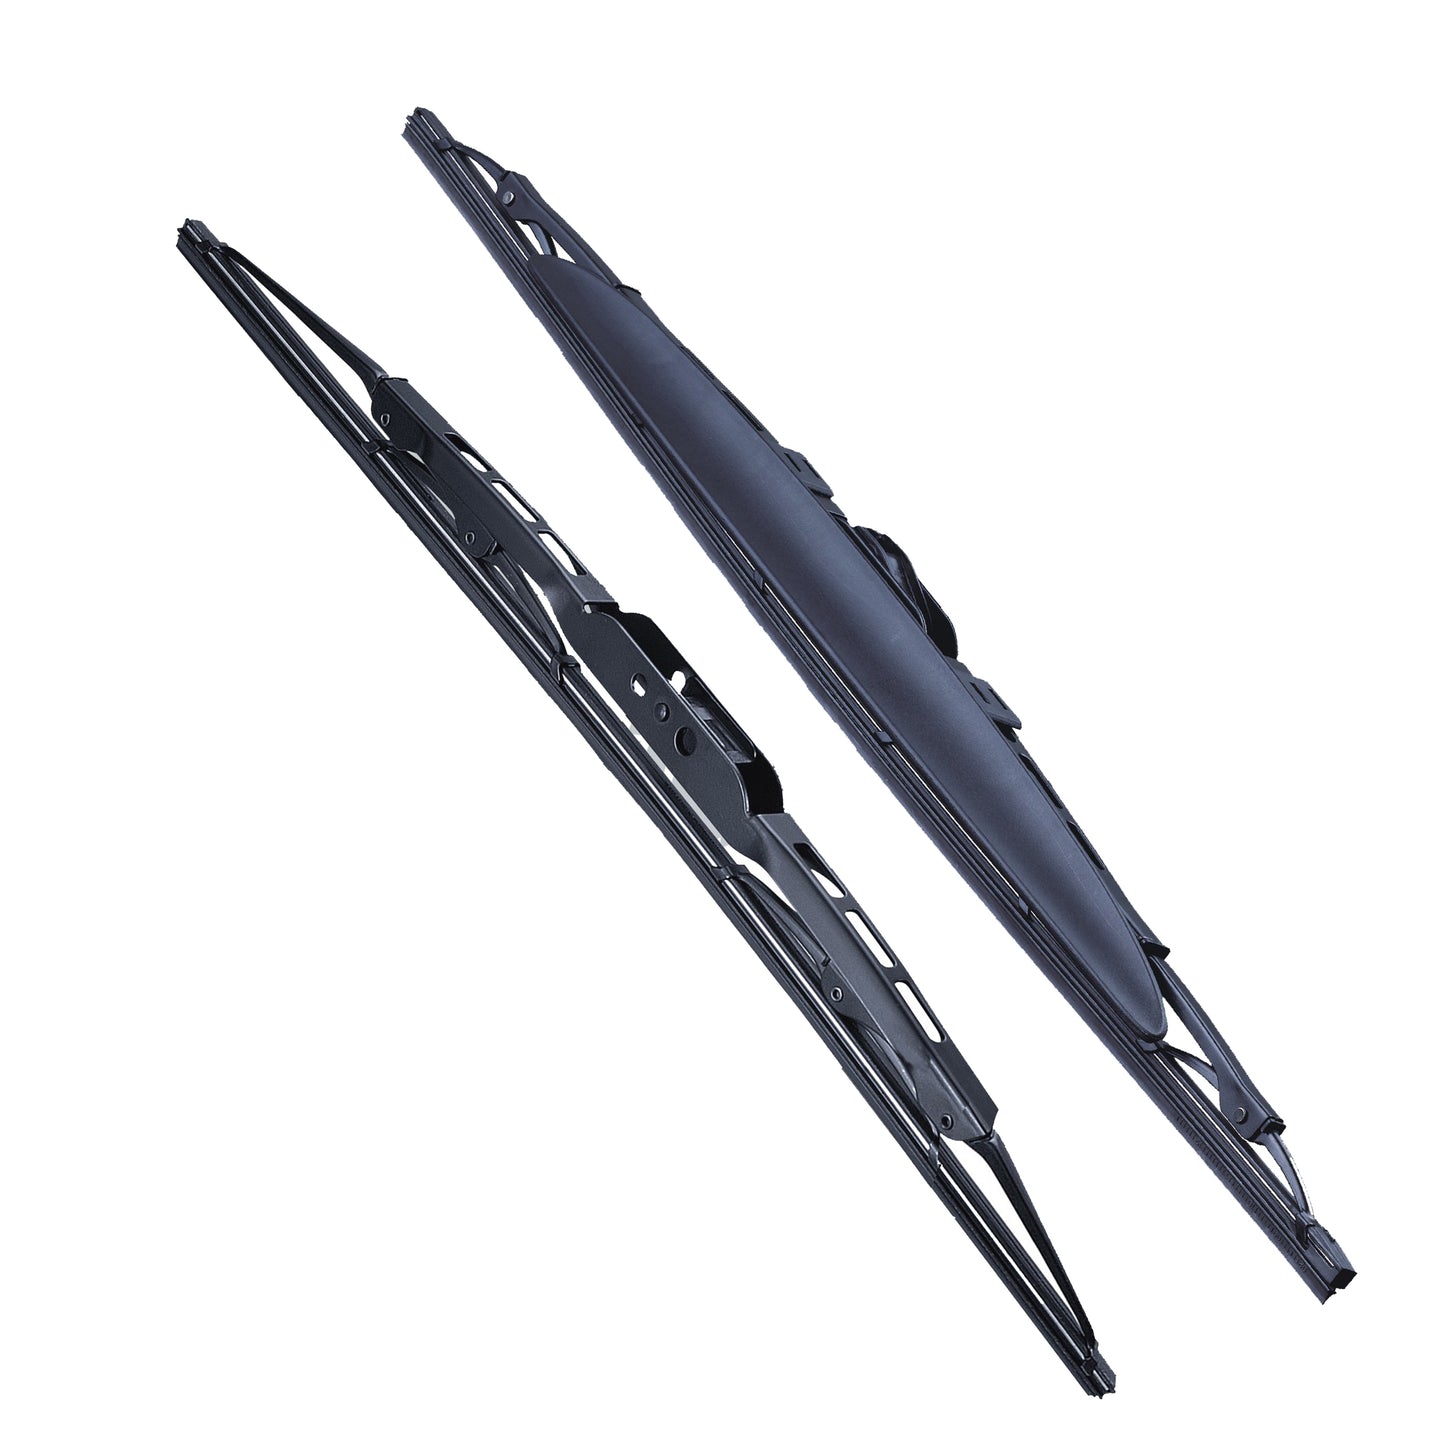 FORD PUMA Coupe Mar 1997 to Jun 2002 Wiper Blade Kit